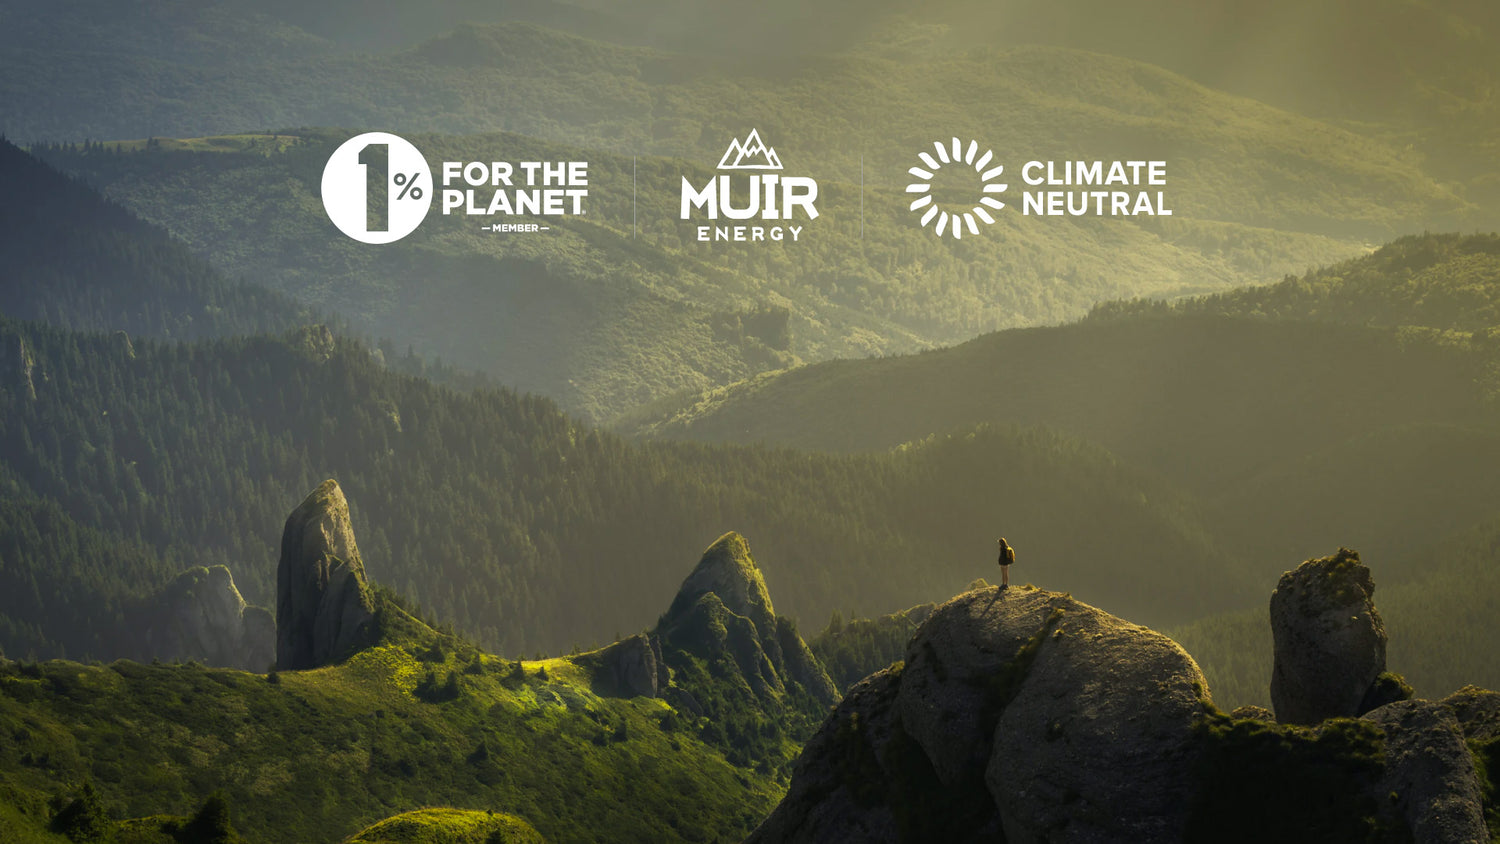 MUIR's Commitment to Sustainability and a Better Tomorrow